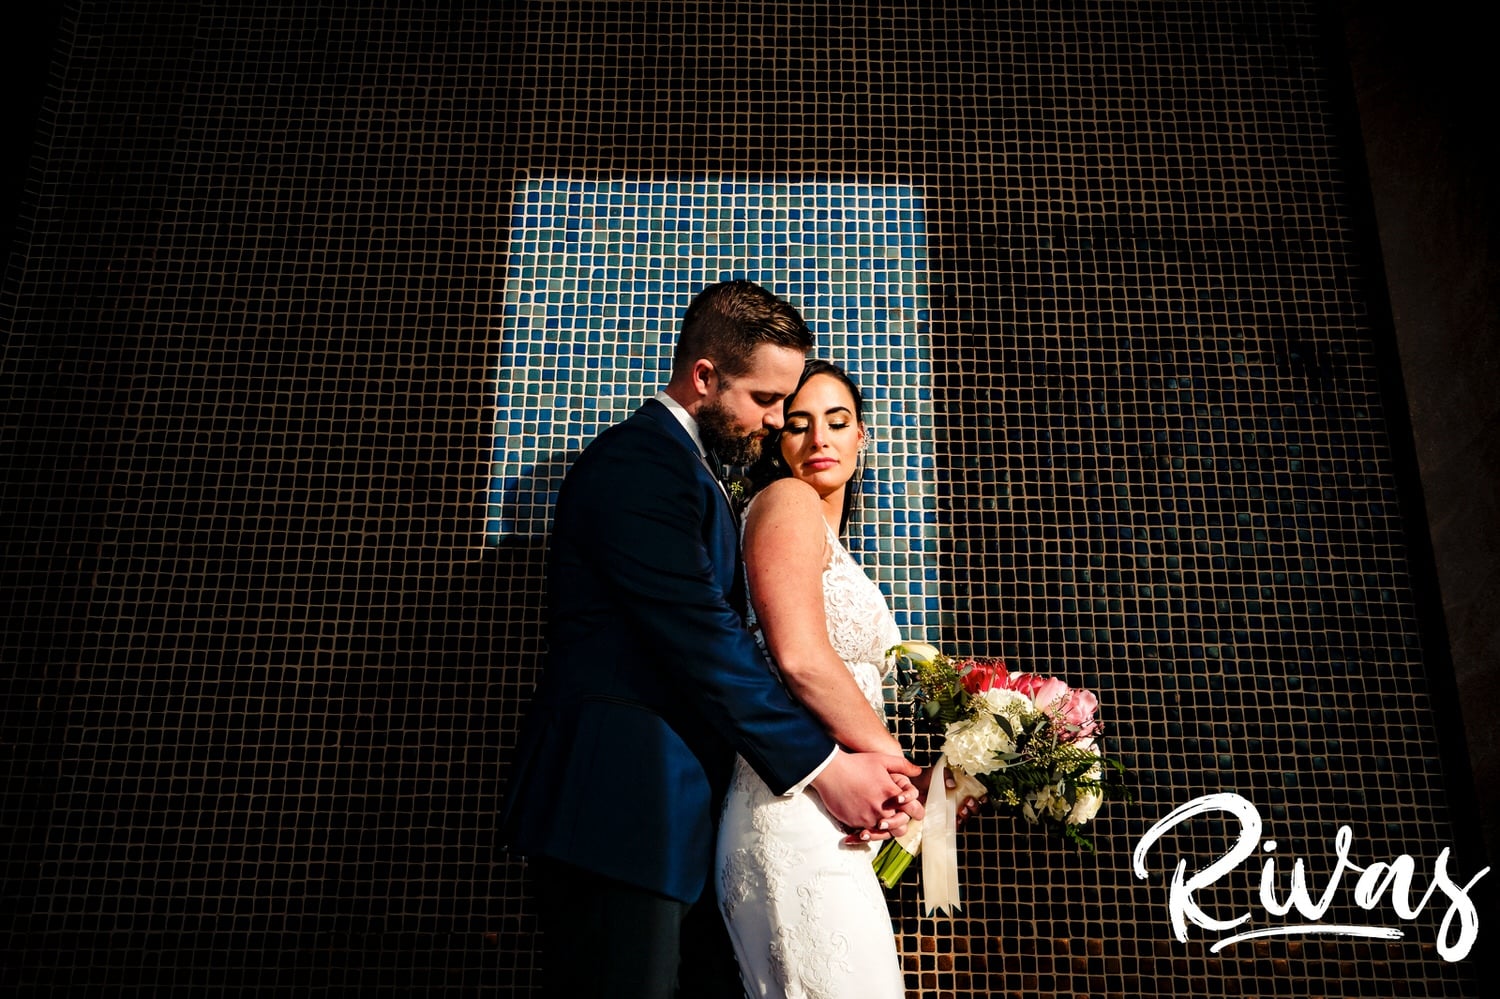 A bold, colorful picture of a modern bride and groom sharing an embrace up against a blue tiled wall bathed in a bright spot of sunlight during their winter wedding day in Kansas City.